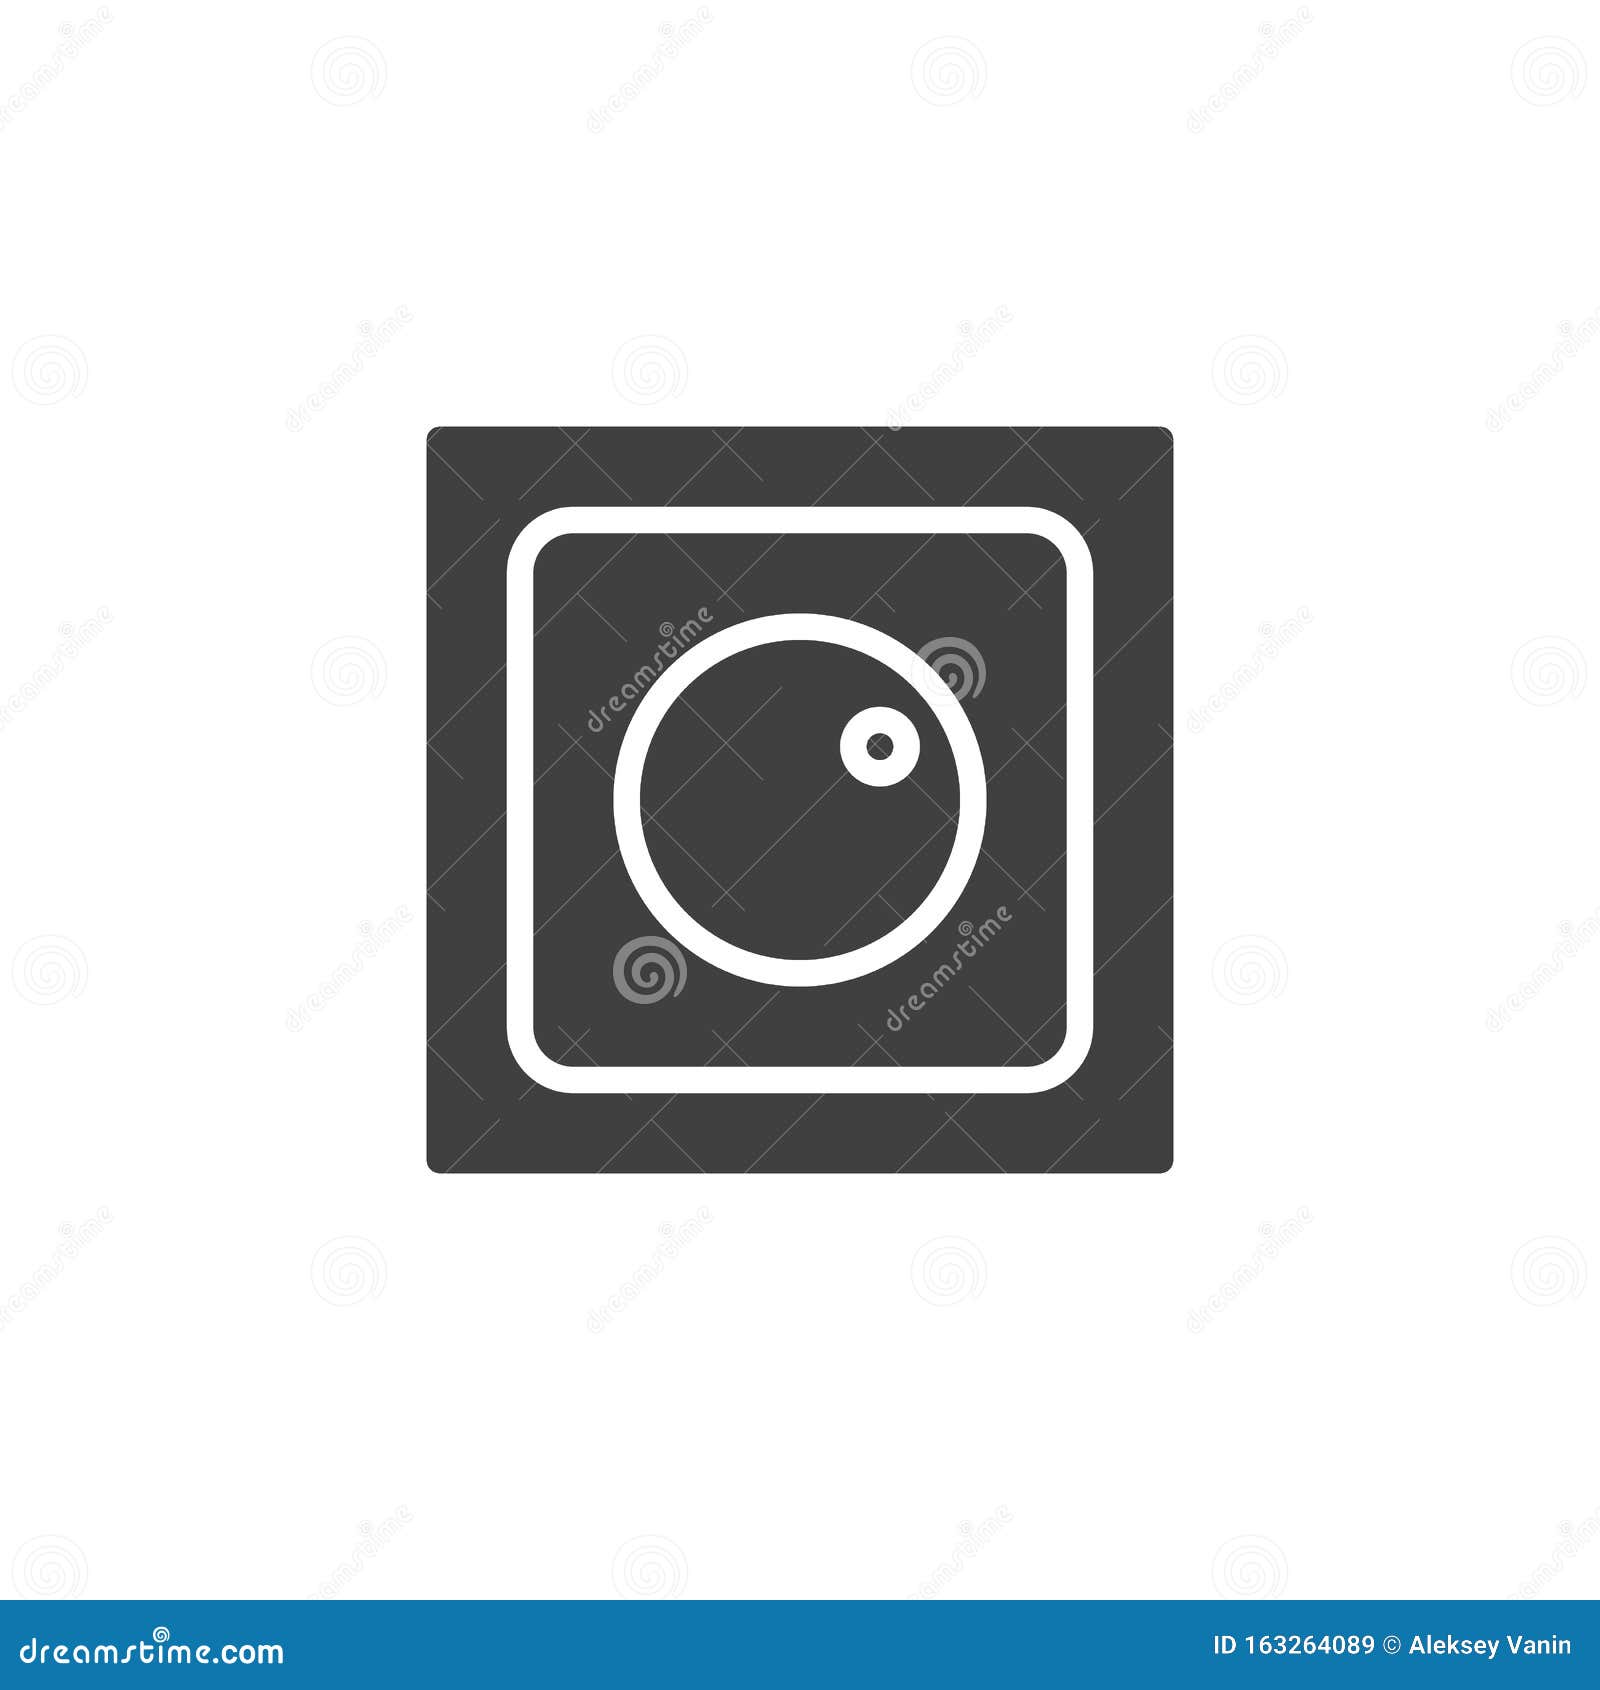 Dimmer switch vector icon stock vector. Illustration of pixel - 163264089